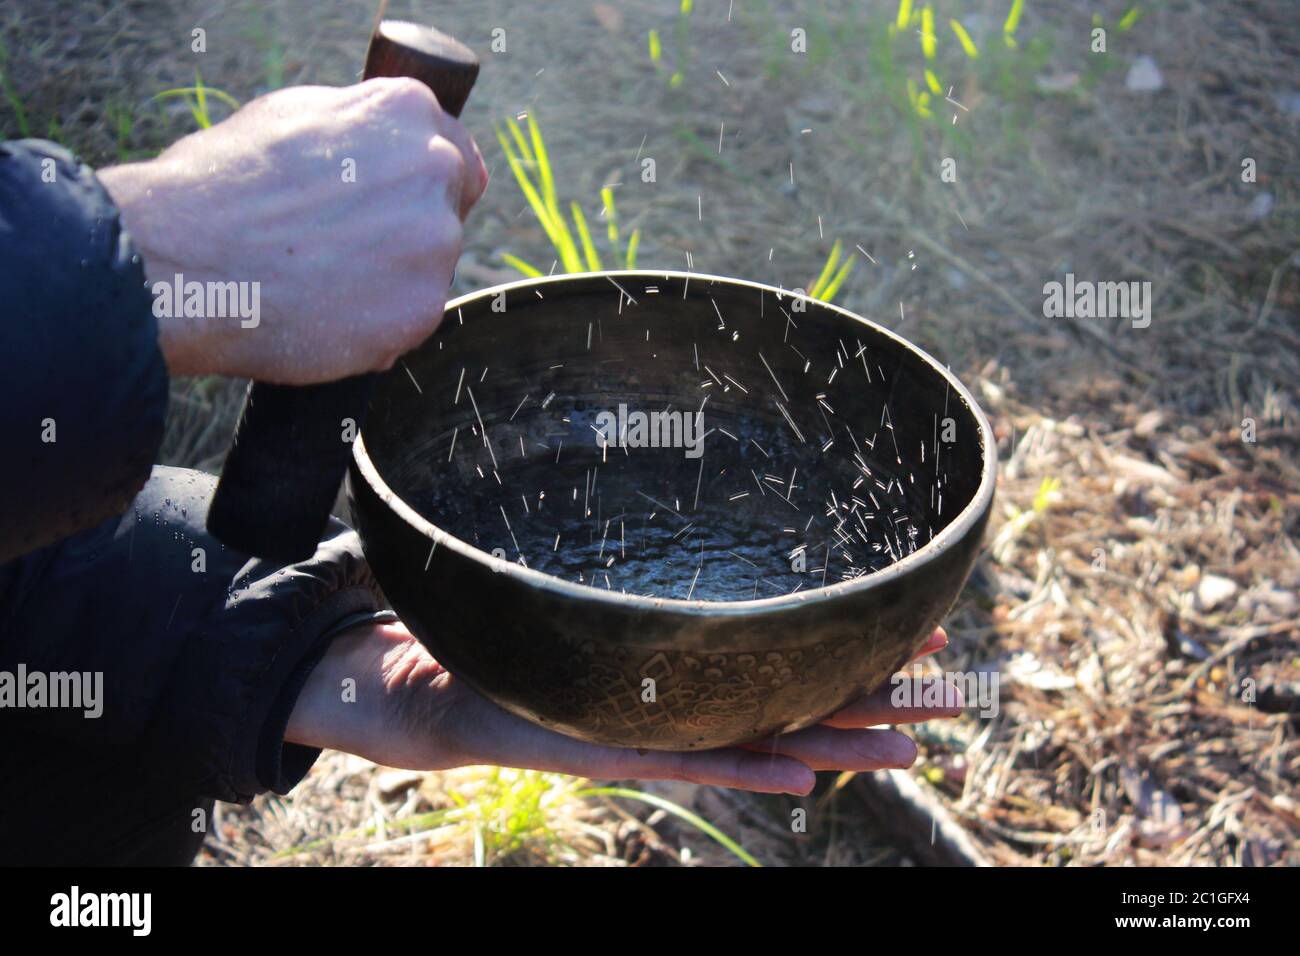 Tibetan bowl with dancing like boiling water in the sunlight in nature as a result of playing on it Stock Photo